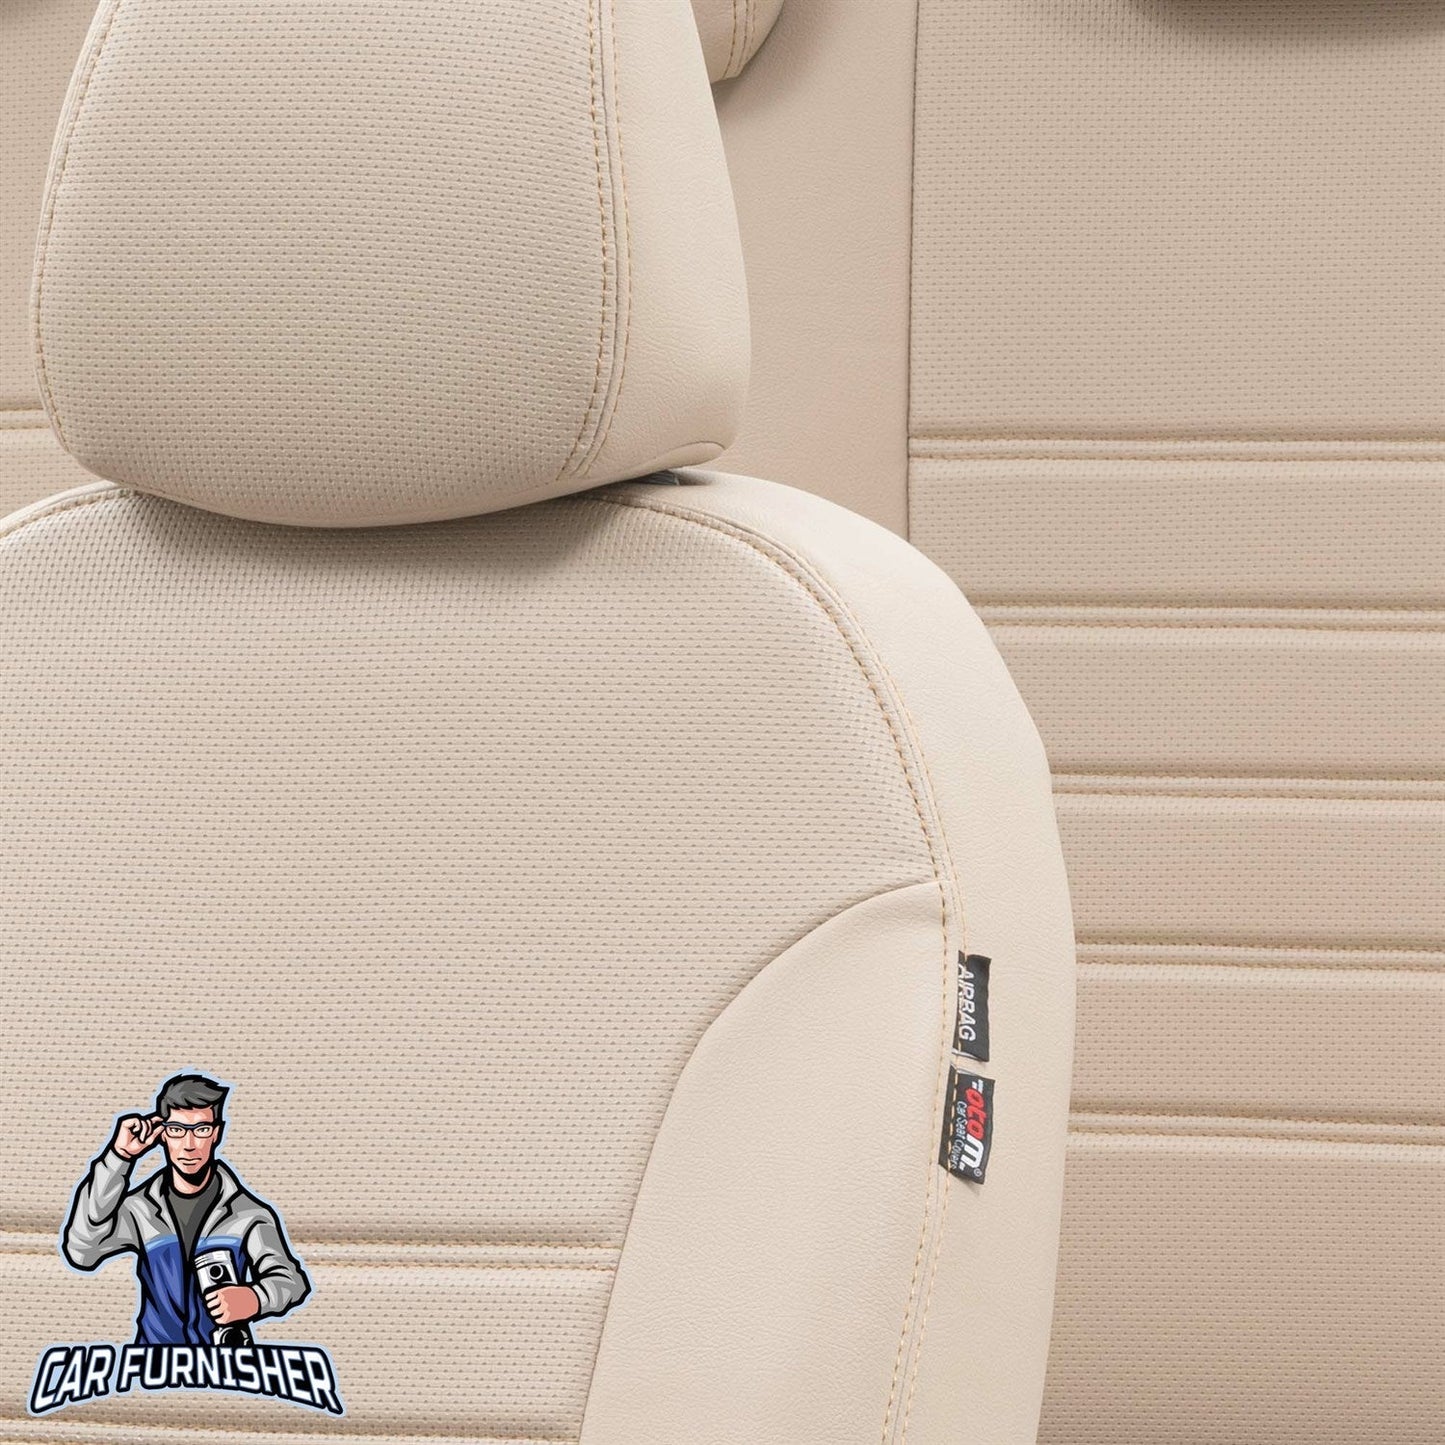 Peugeot 106 Seat Covers New York Leather Design Beige Leather